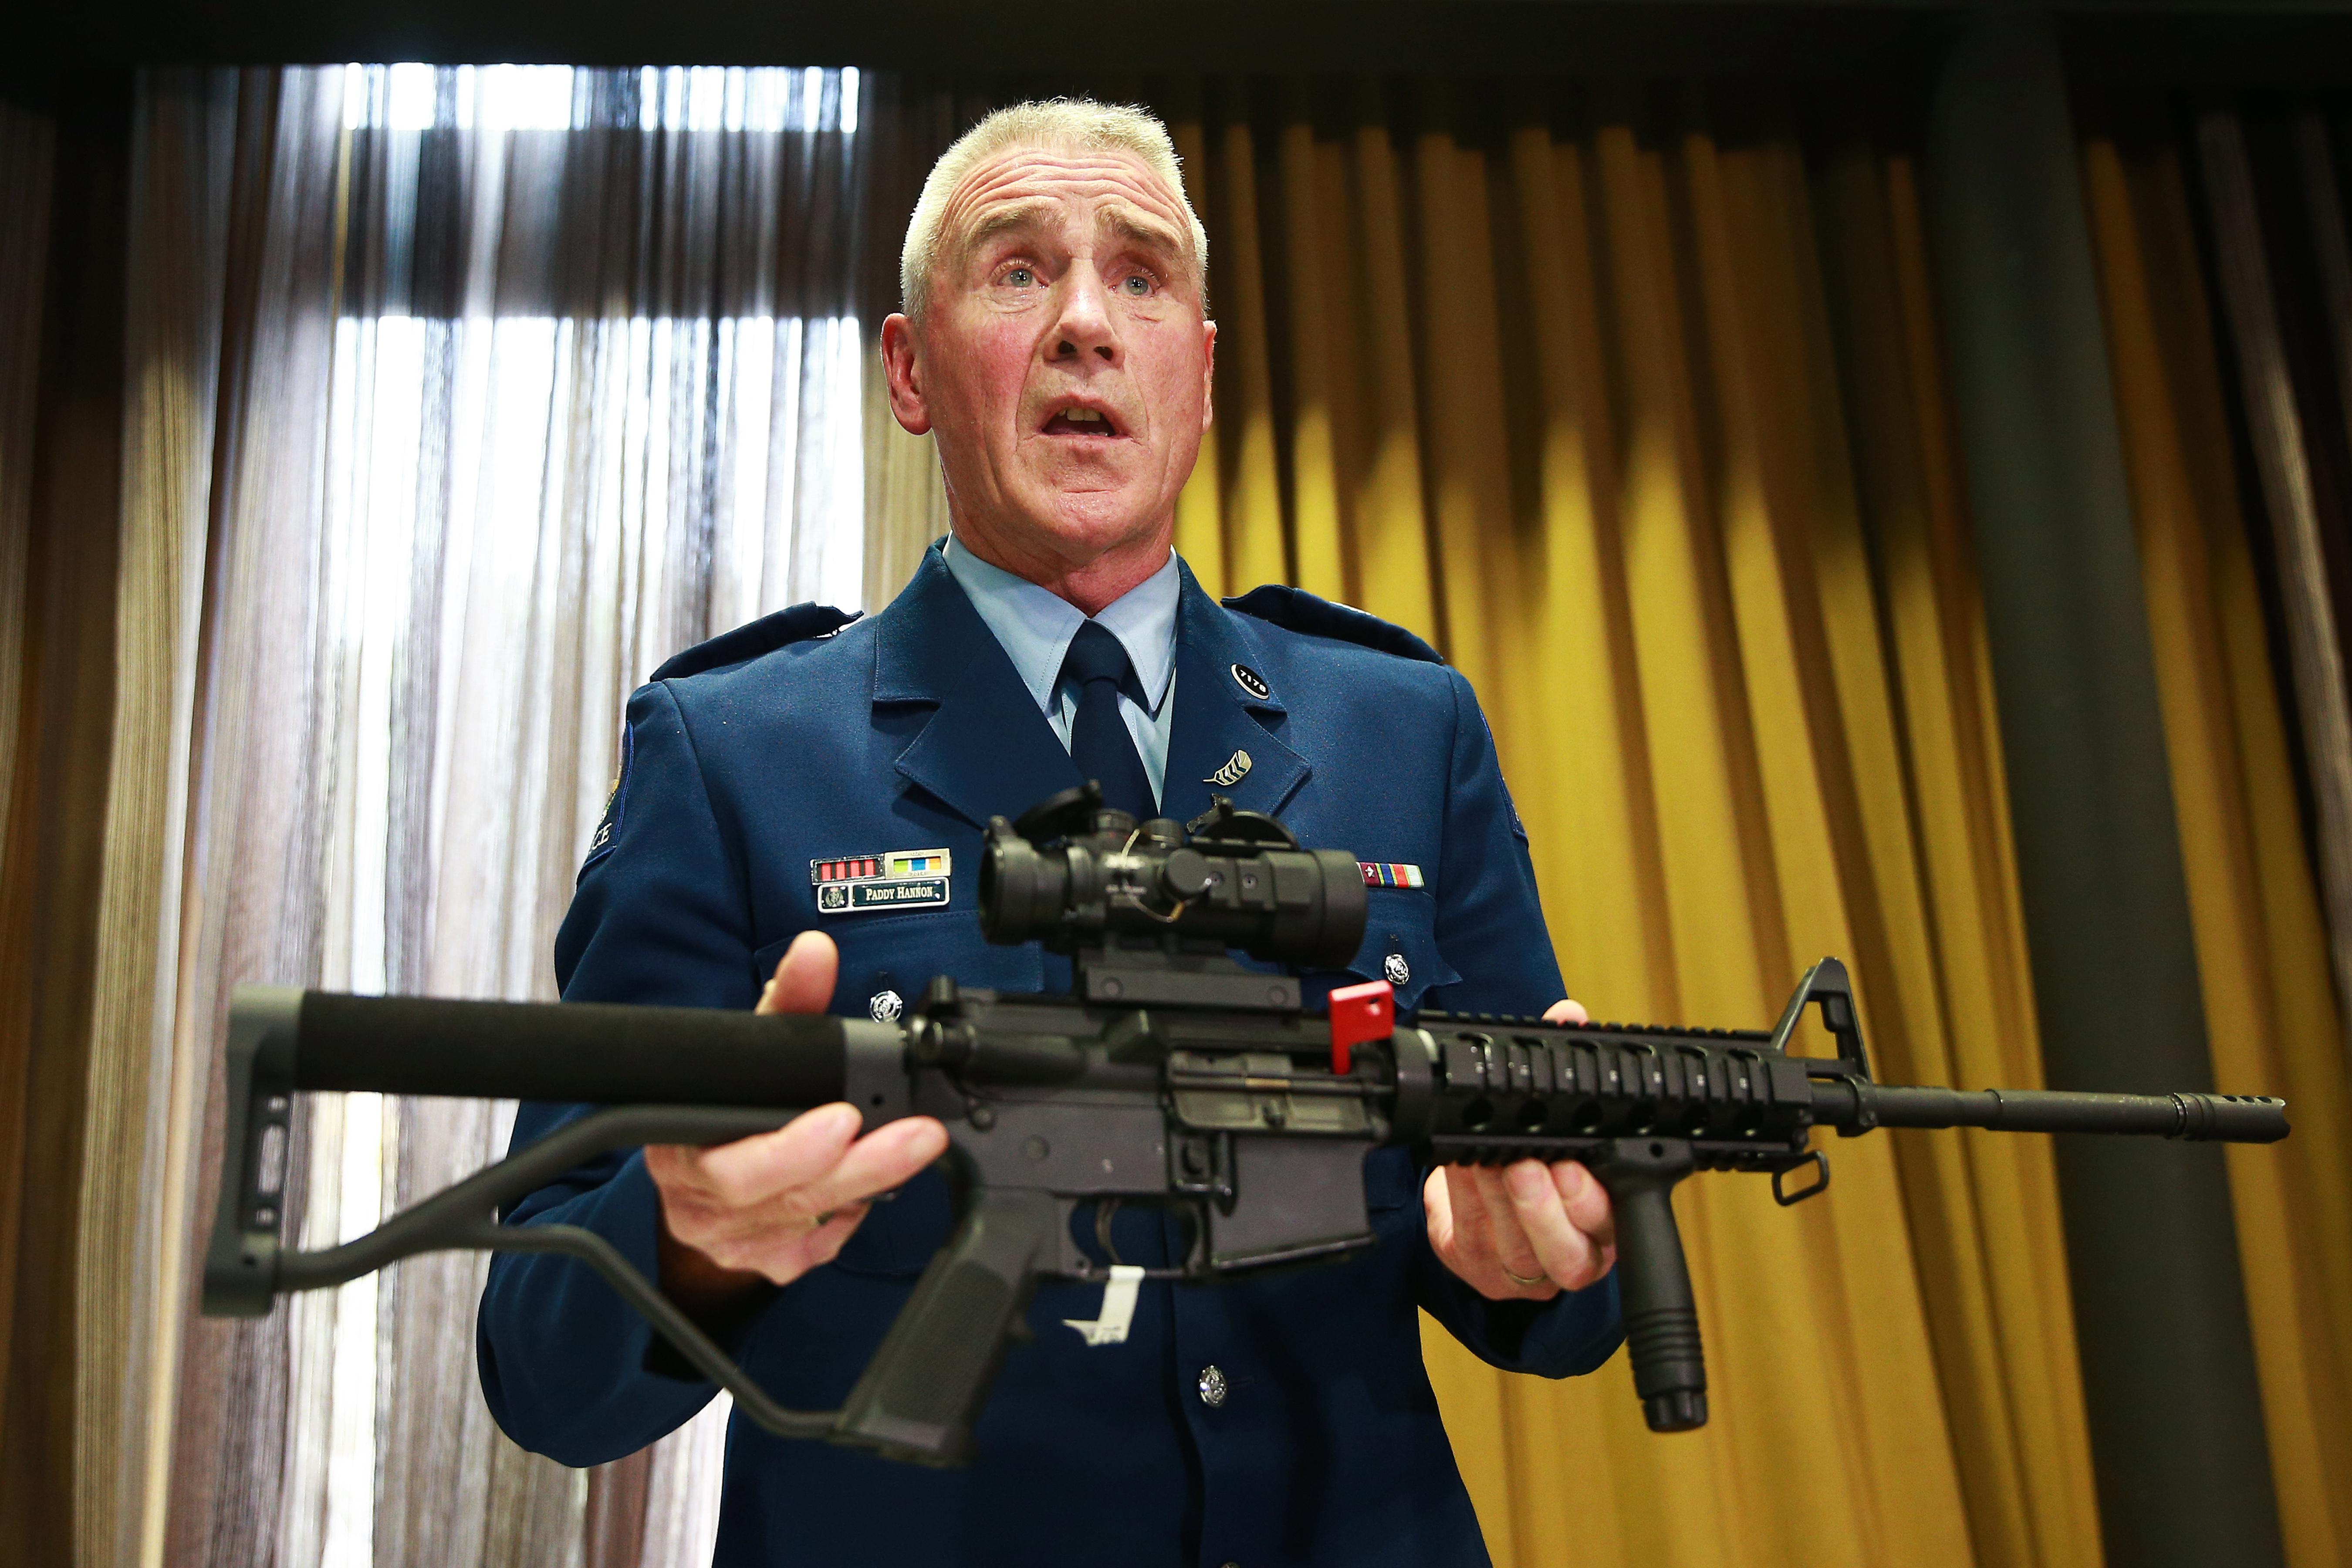 New Zealand official shows the type of gun banned under the new legislation during a press conference April 11, 2019 in Wellington, New Zealand.